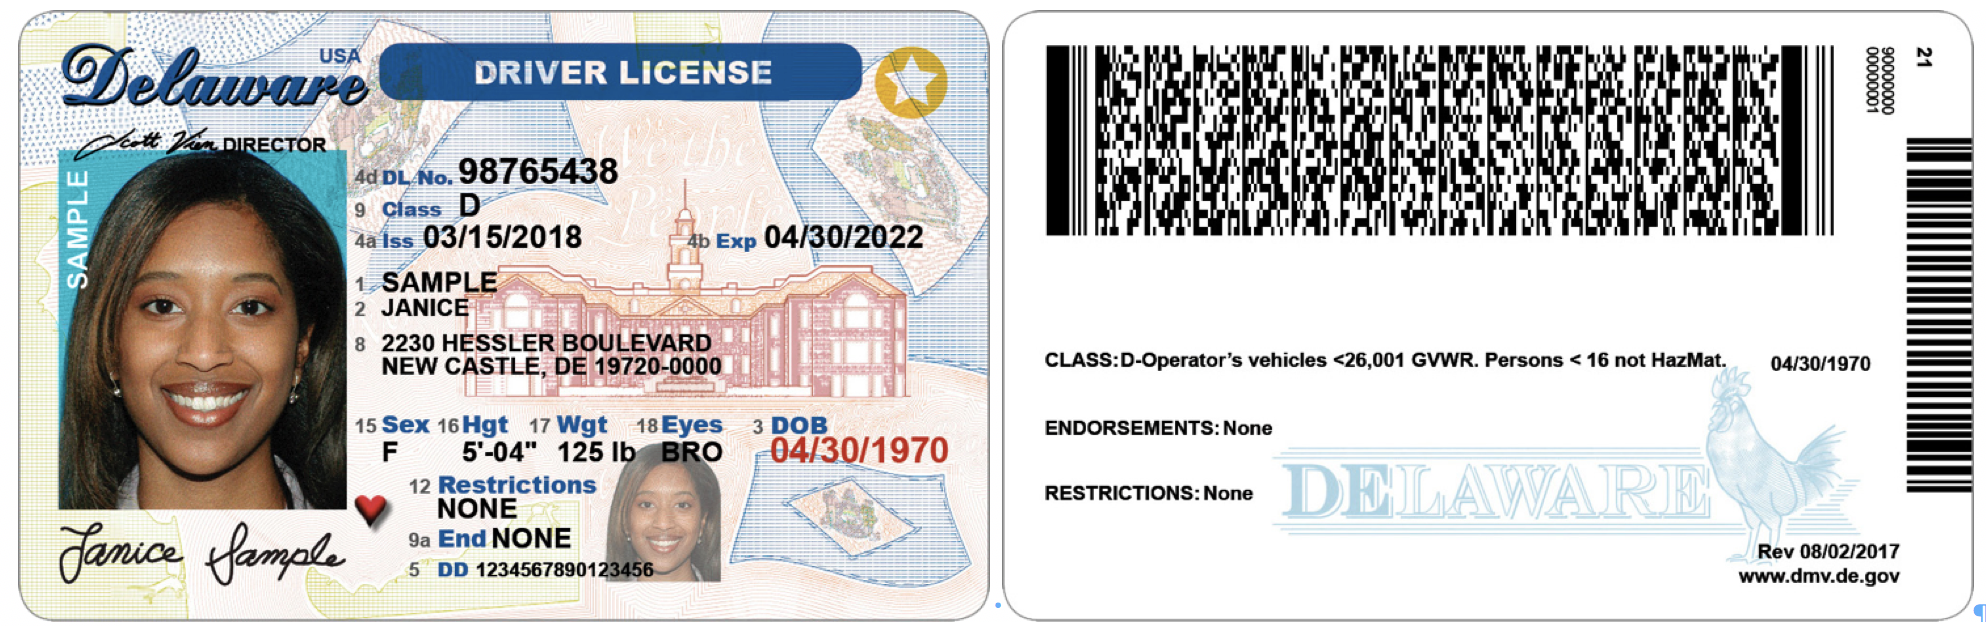 The Division of Motor Vehicles Announces New Design for Driver License